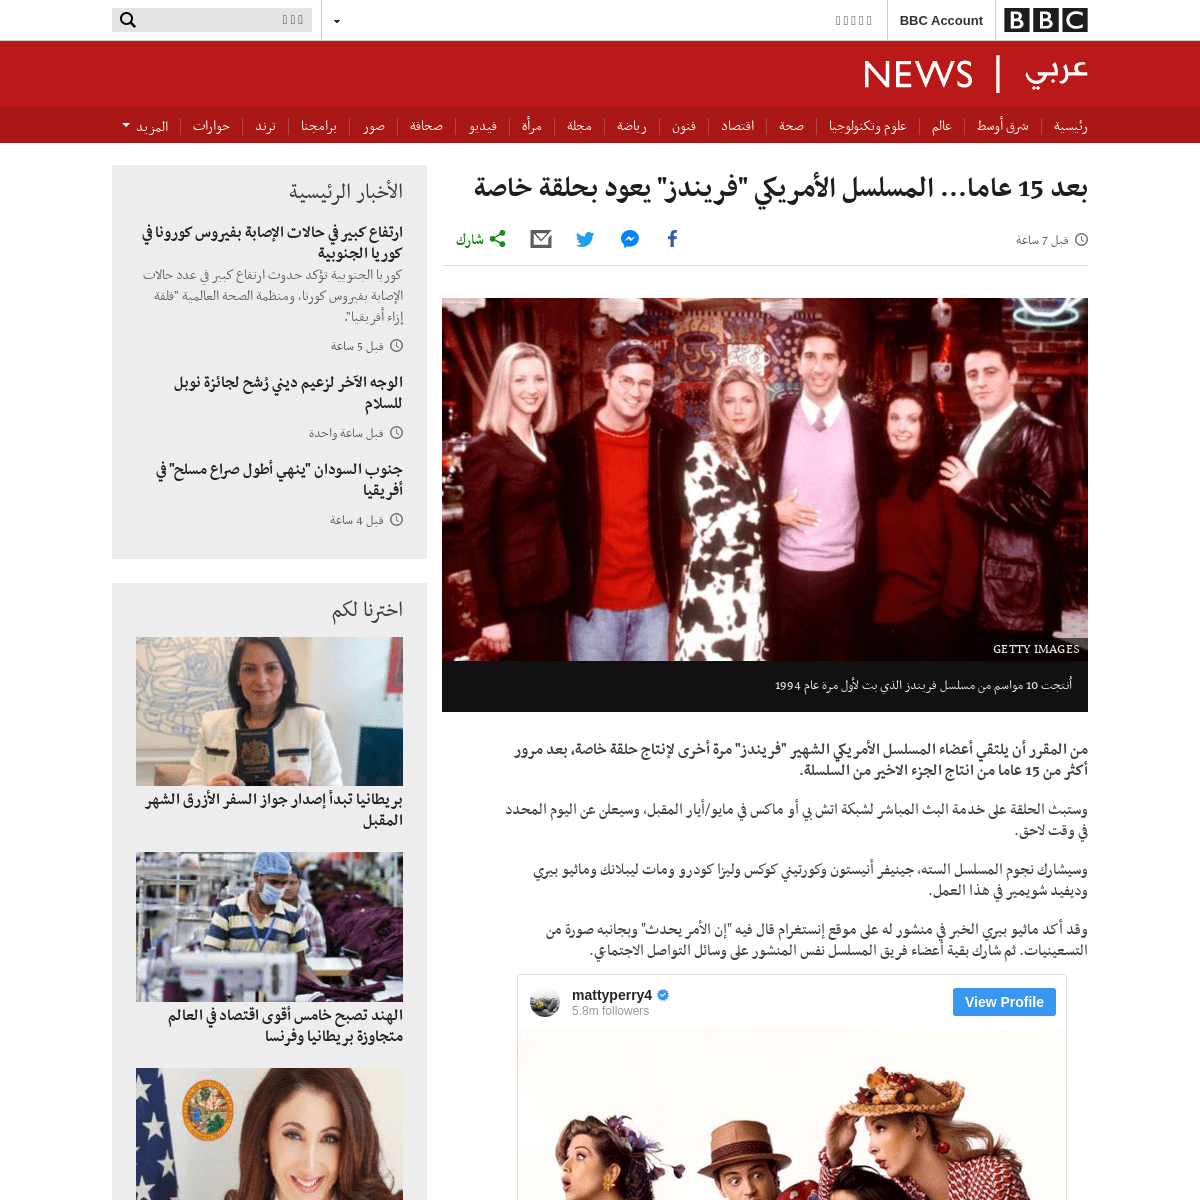 A complete backup of www.bbc.com/arabic/art-and-culture-51596546